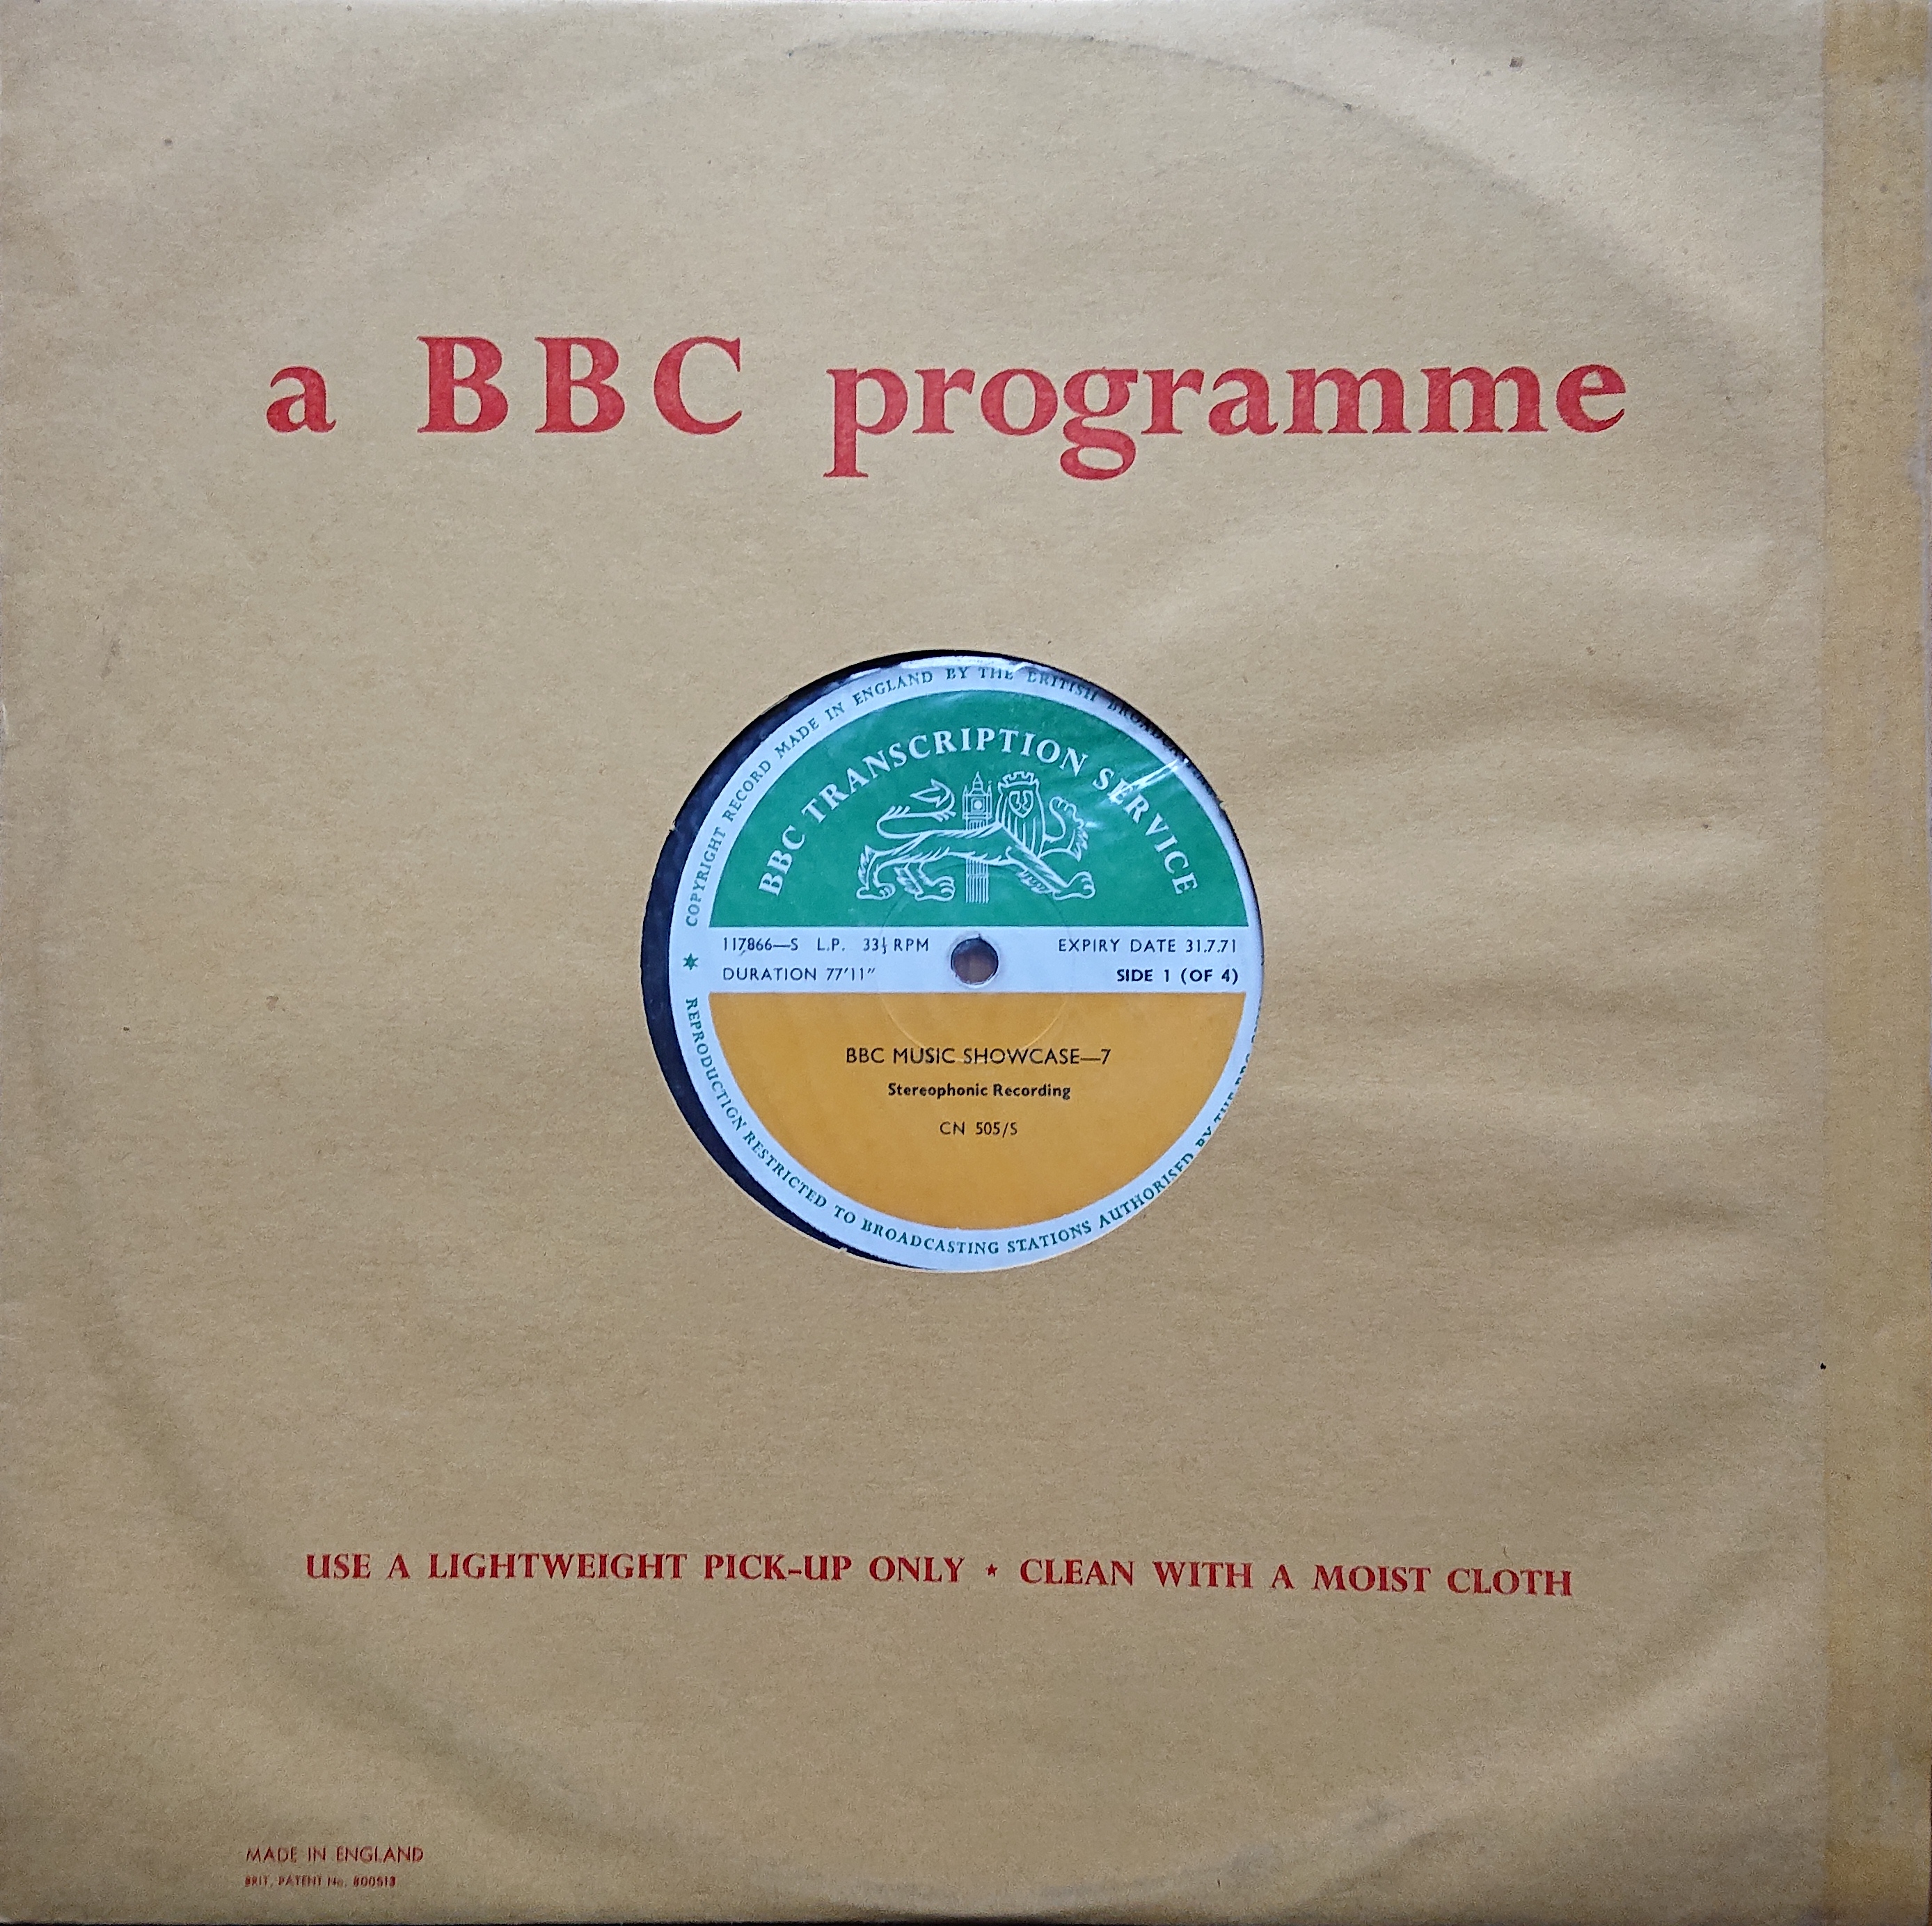 Picture of CN 505 S 13 BBC music showcase - 7 (Sides 1 & 3) by artist Various from the BBC albums - Records and Tapes library